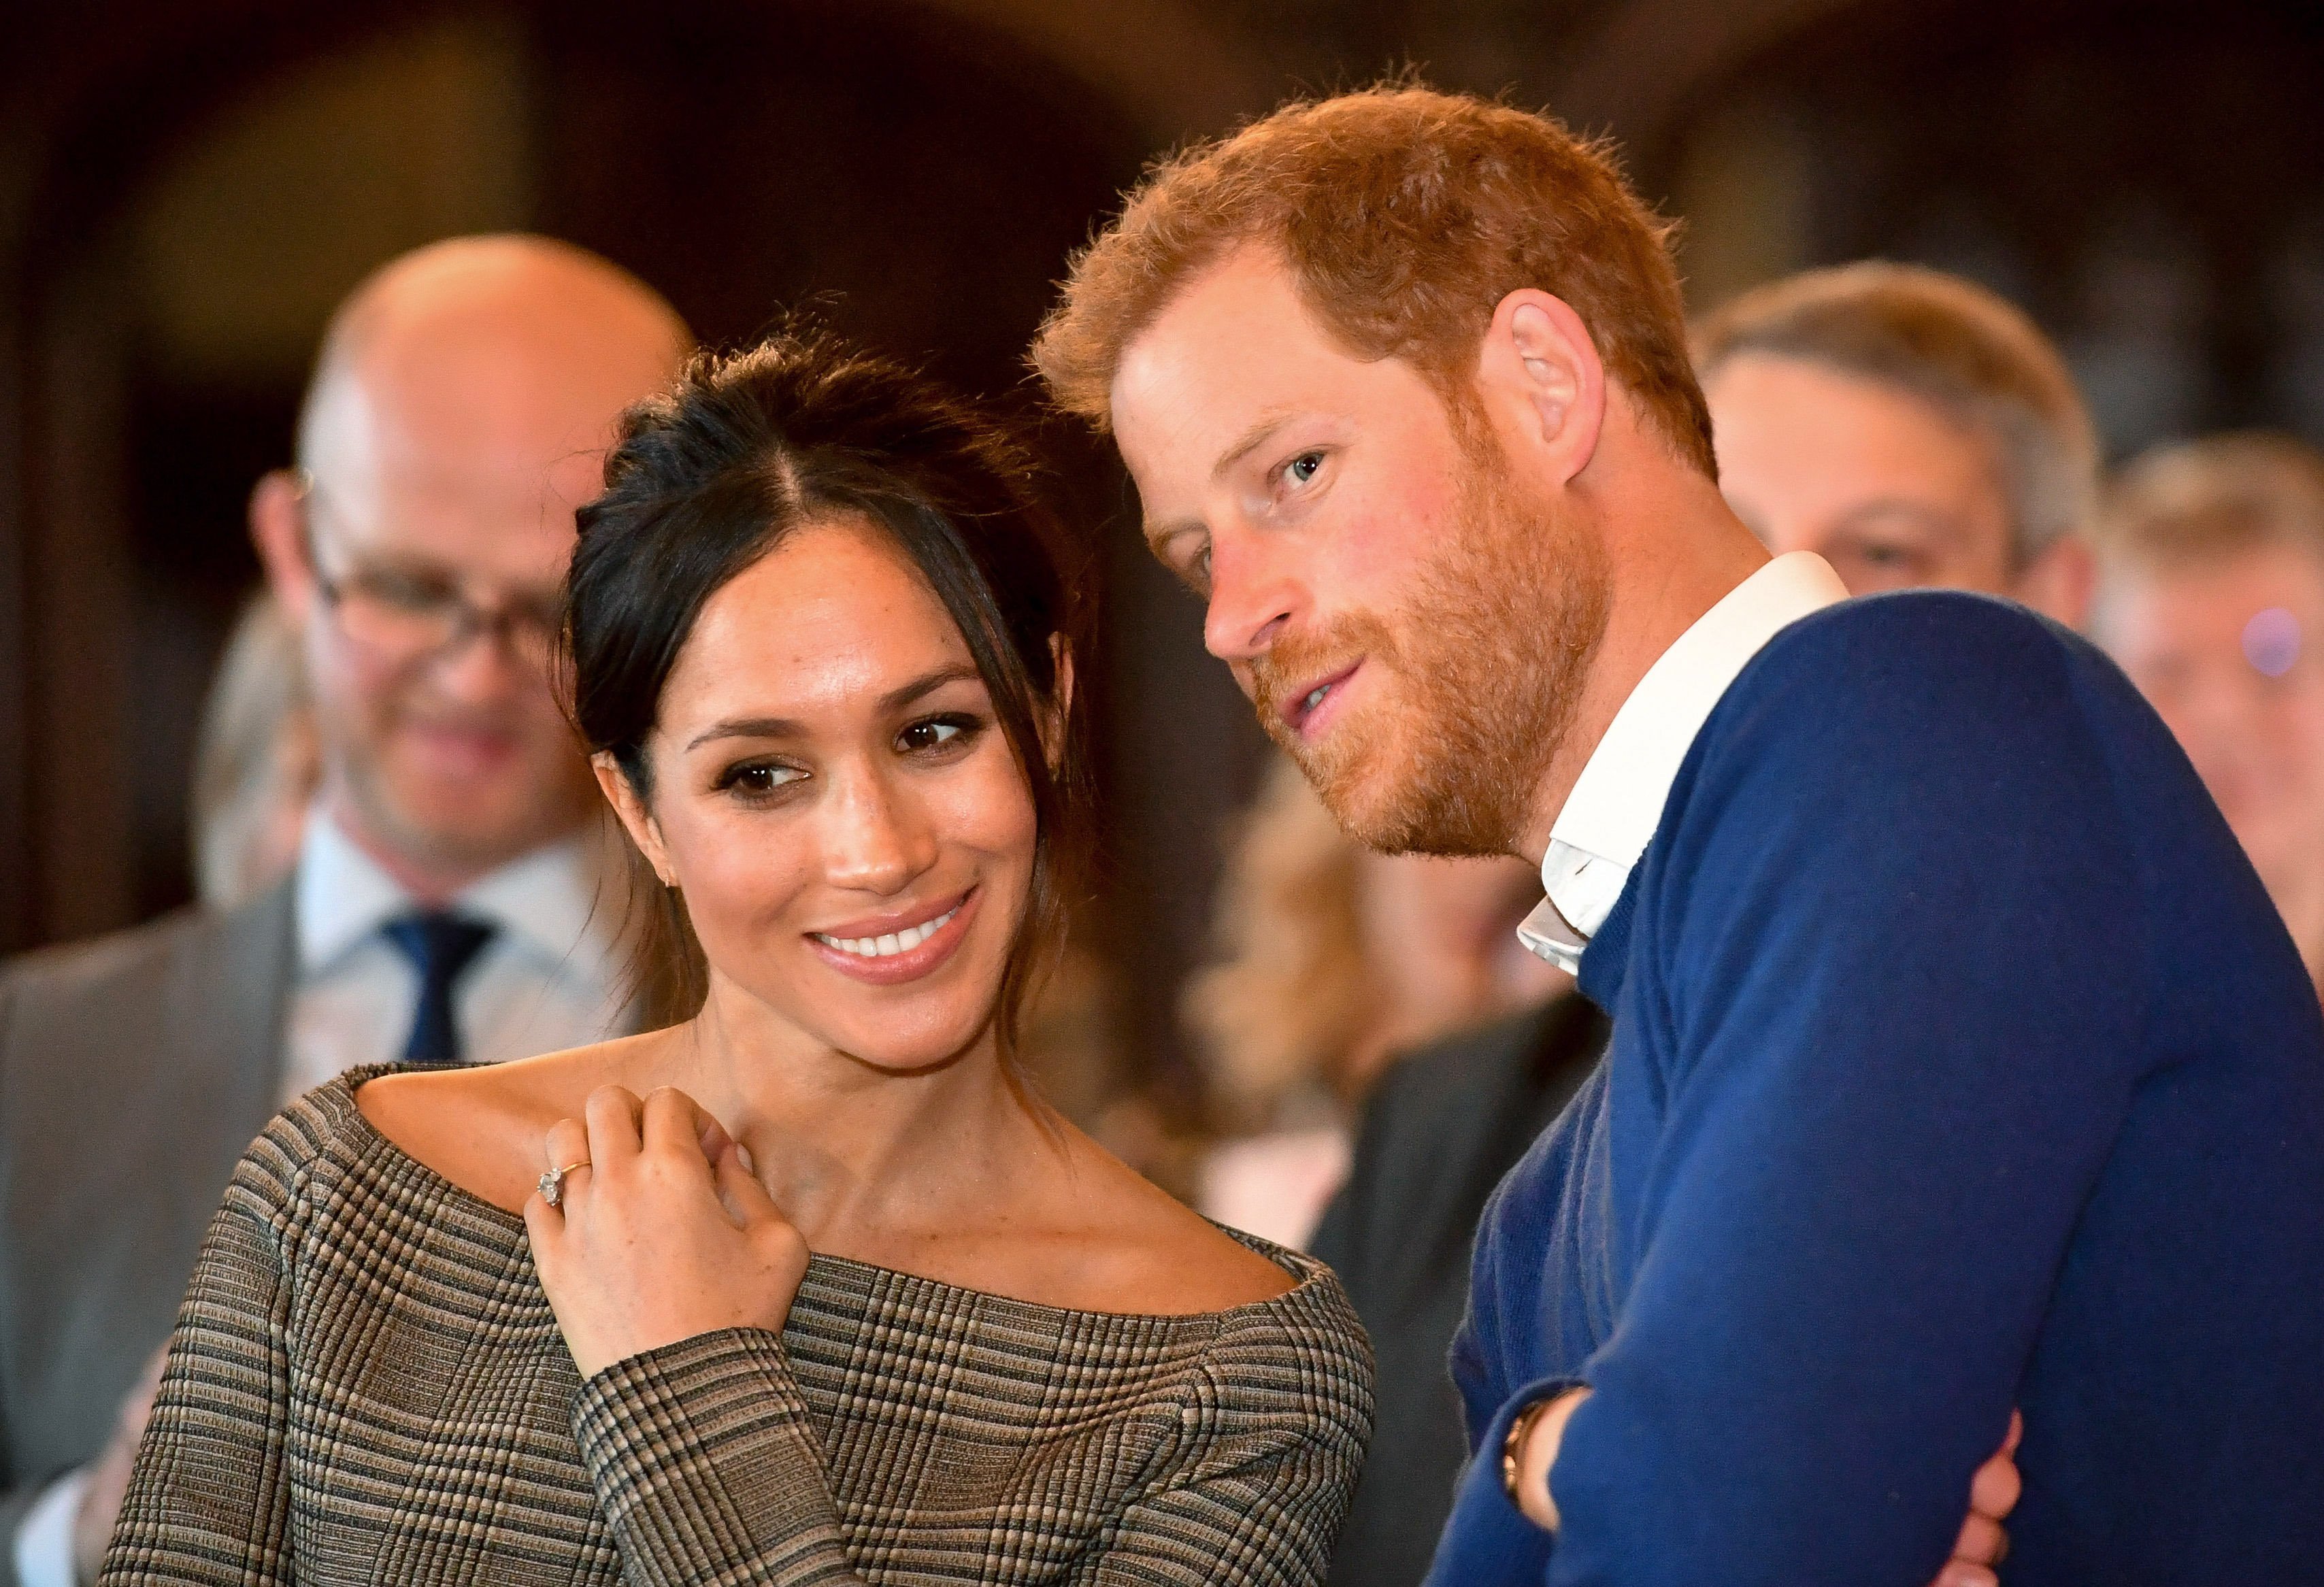 Prince Harry whispers to Meghan Markle as they watch a dance performance by Jukebox Collective in the banqueting hall during a visit to Cardiff Castle on January 18, 2018 in Cardiff, Wales | Source: Getty Images 